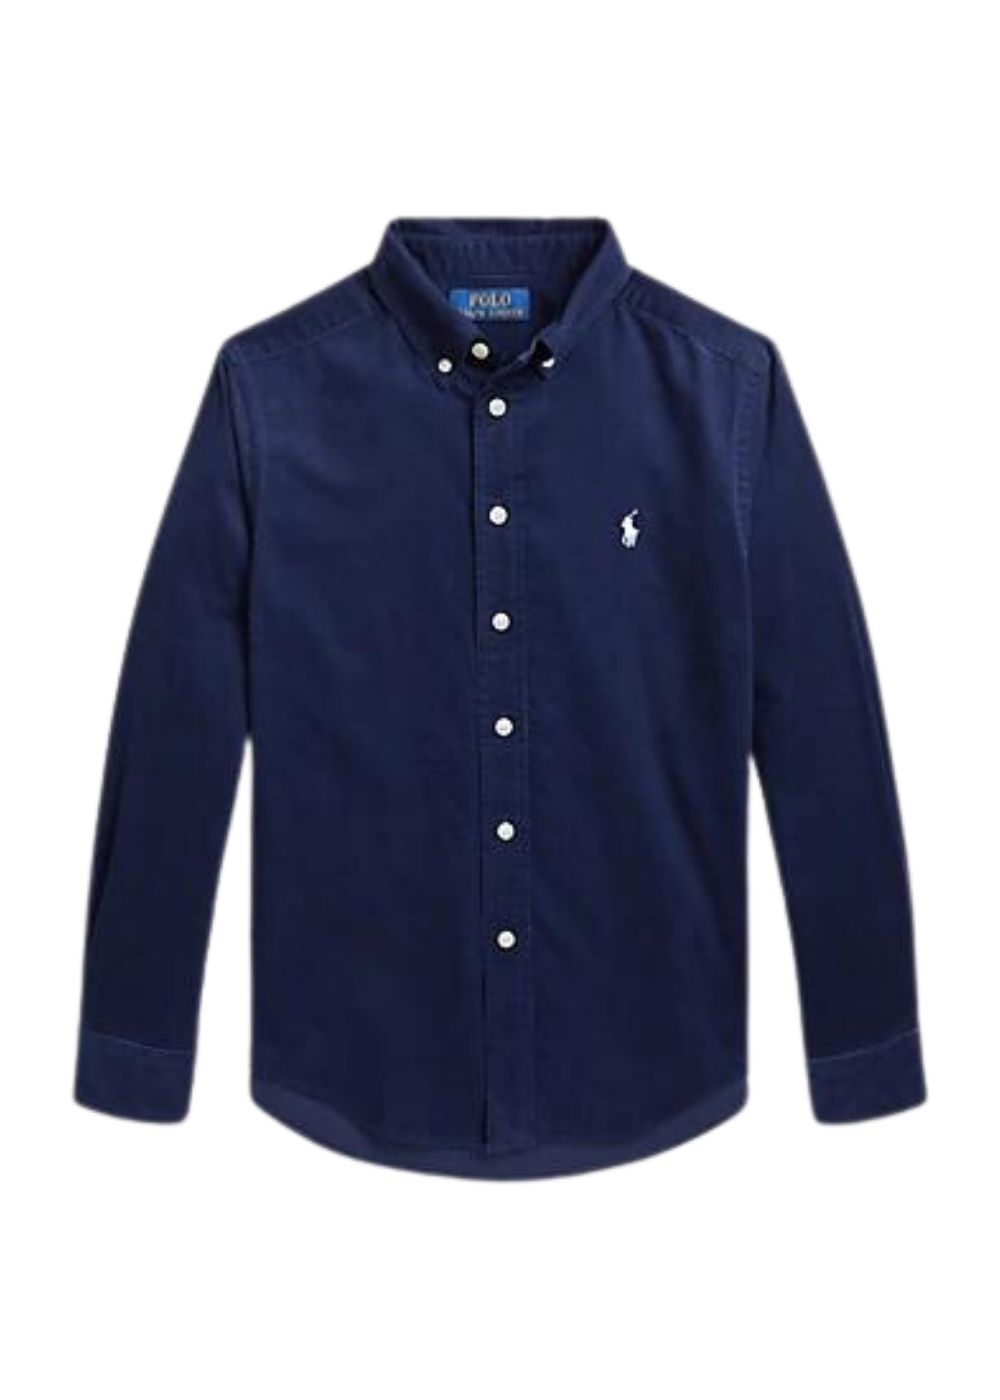 Featured image for “Polo Ralph Lauren Camicia Velluto A Coste”